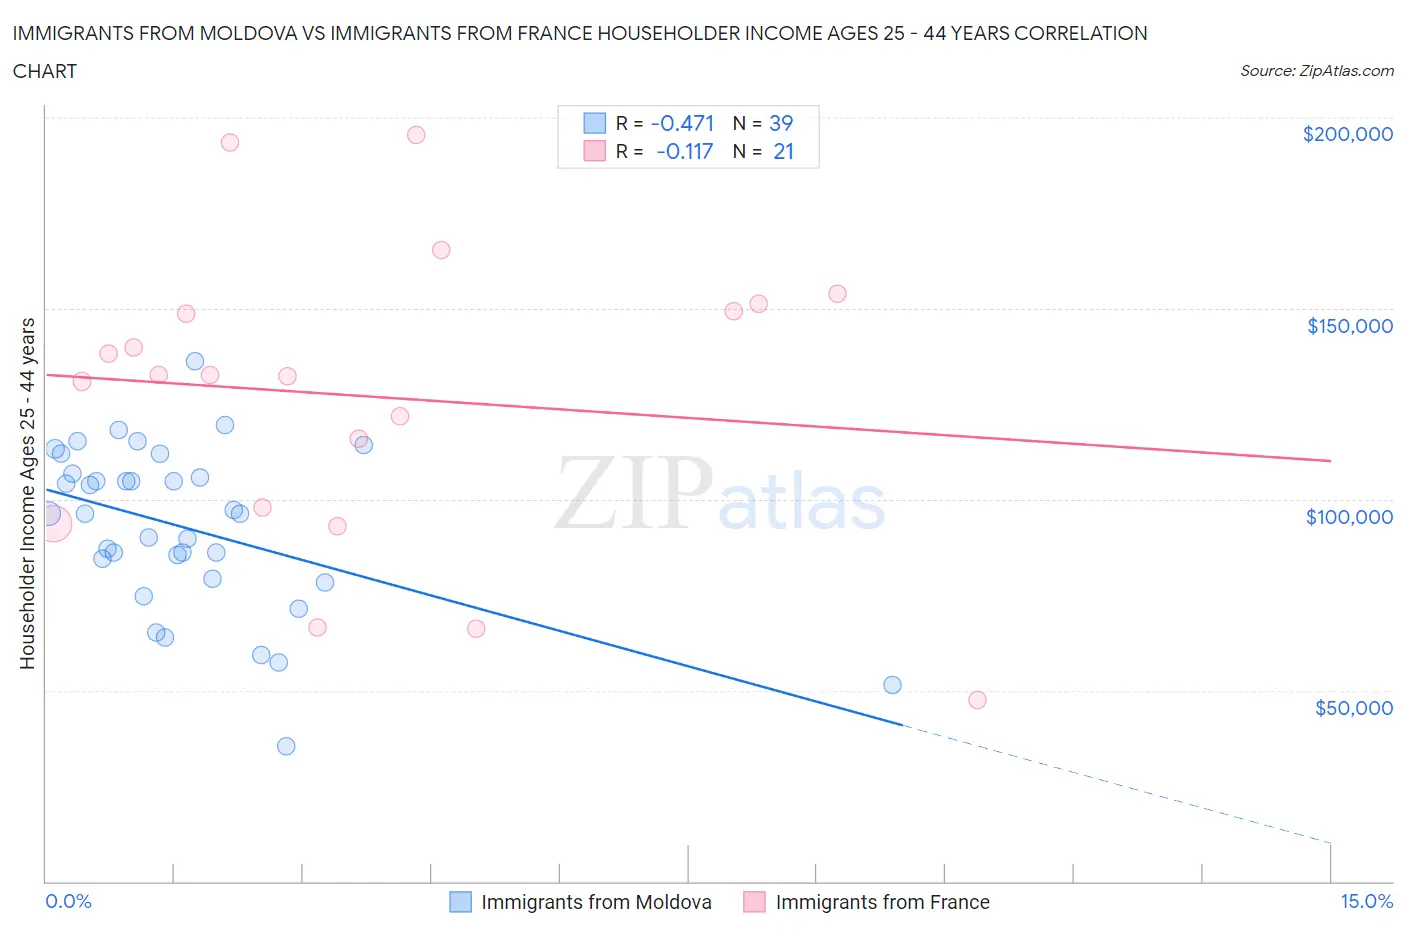 Immigrants from Moldova vs Immigrants from France Householder Income Ages 25 - 44 years